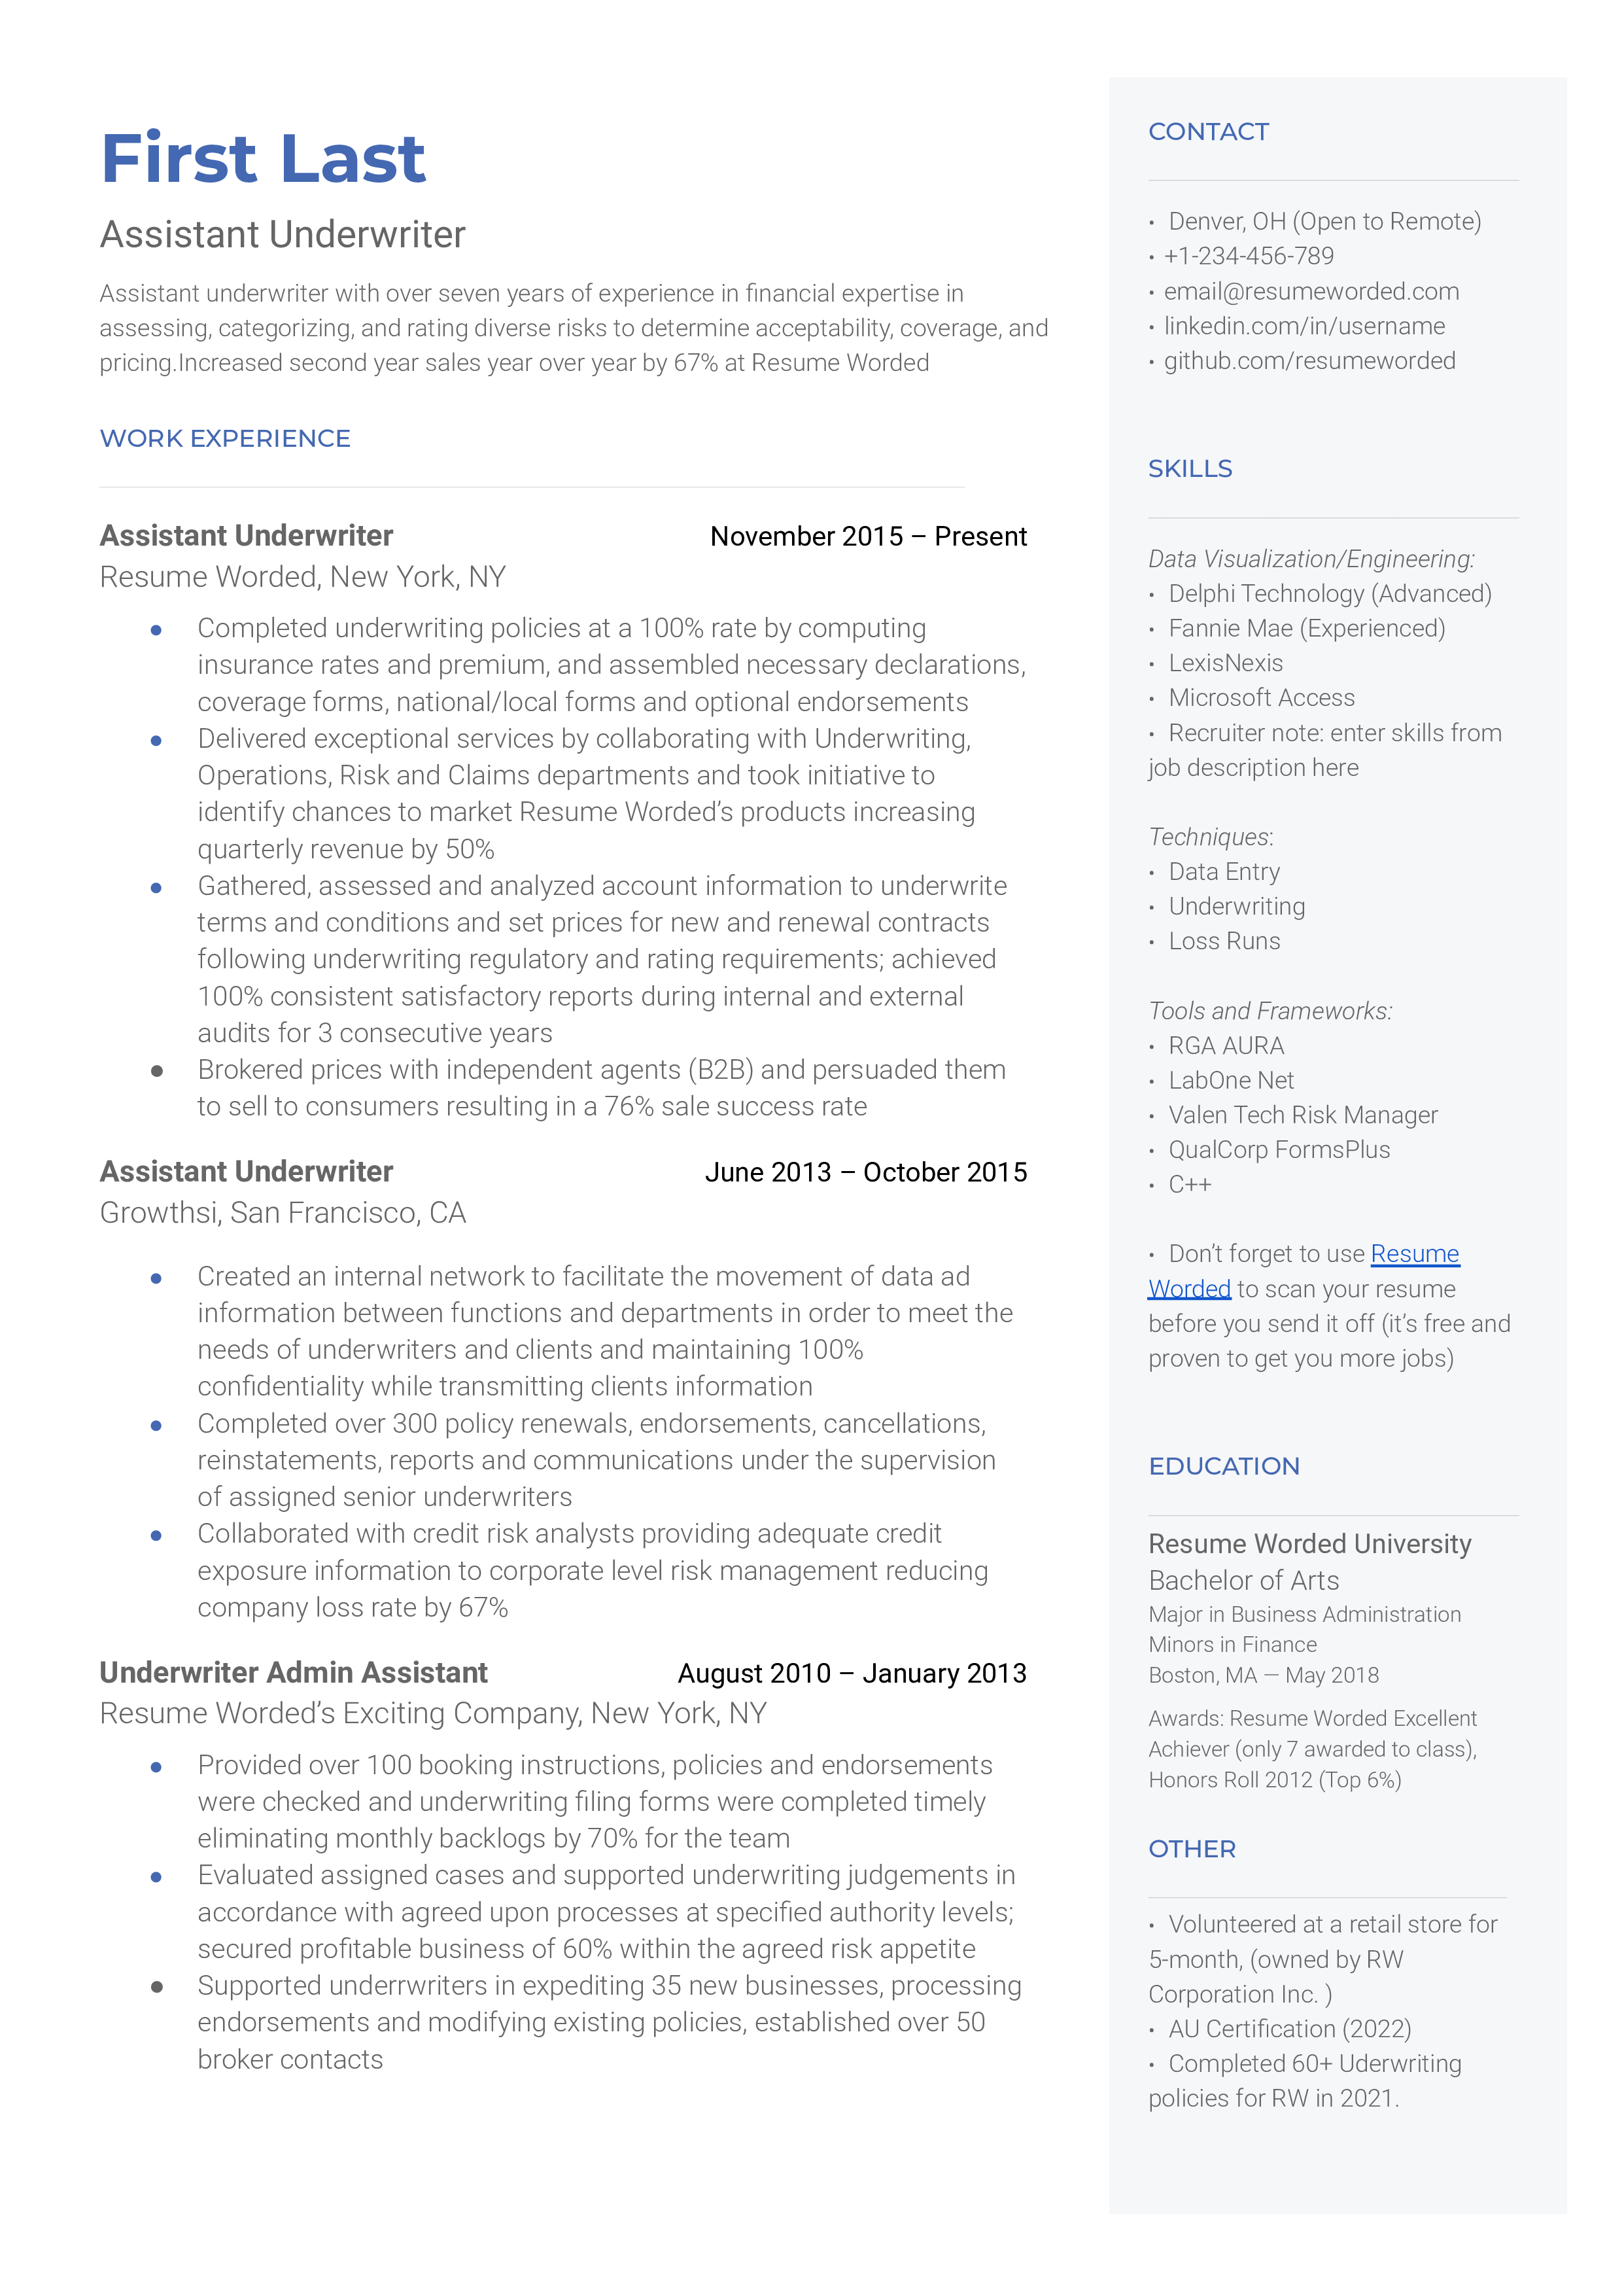 This resume is displaying an assistant underwriter's template that can be used as inspiration for good resumes.